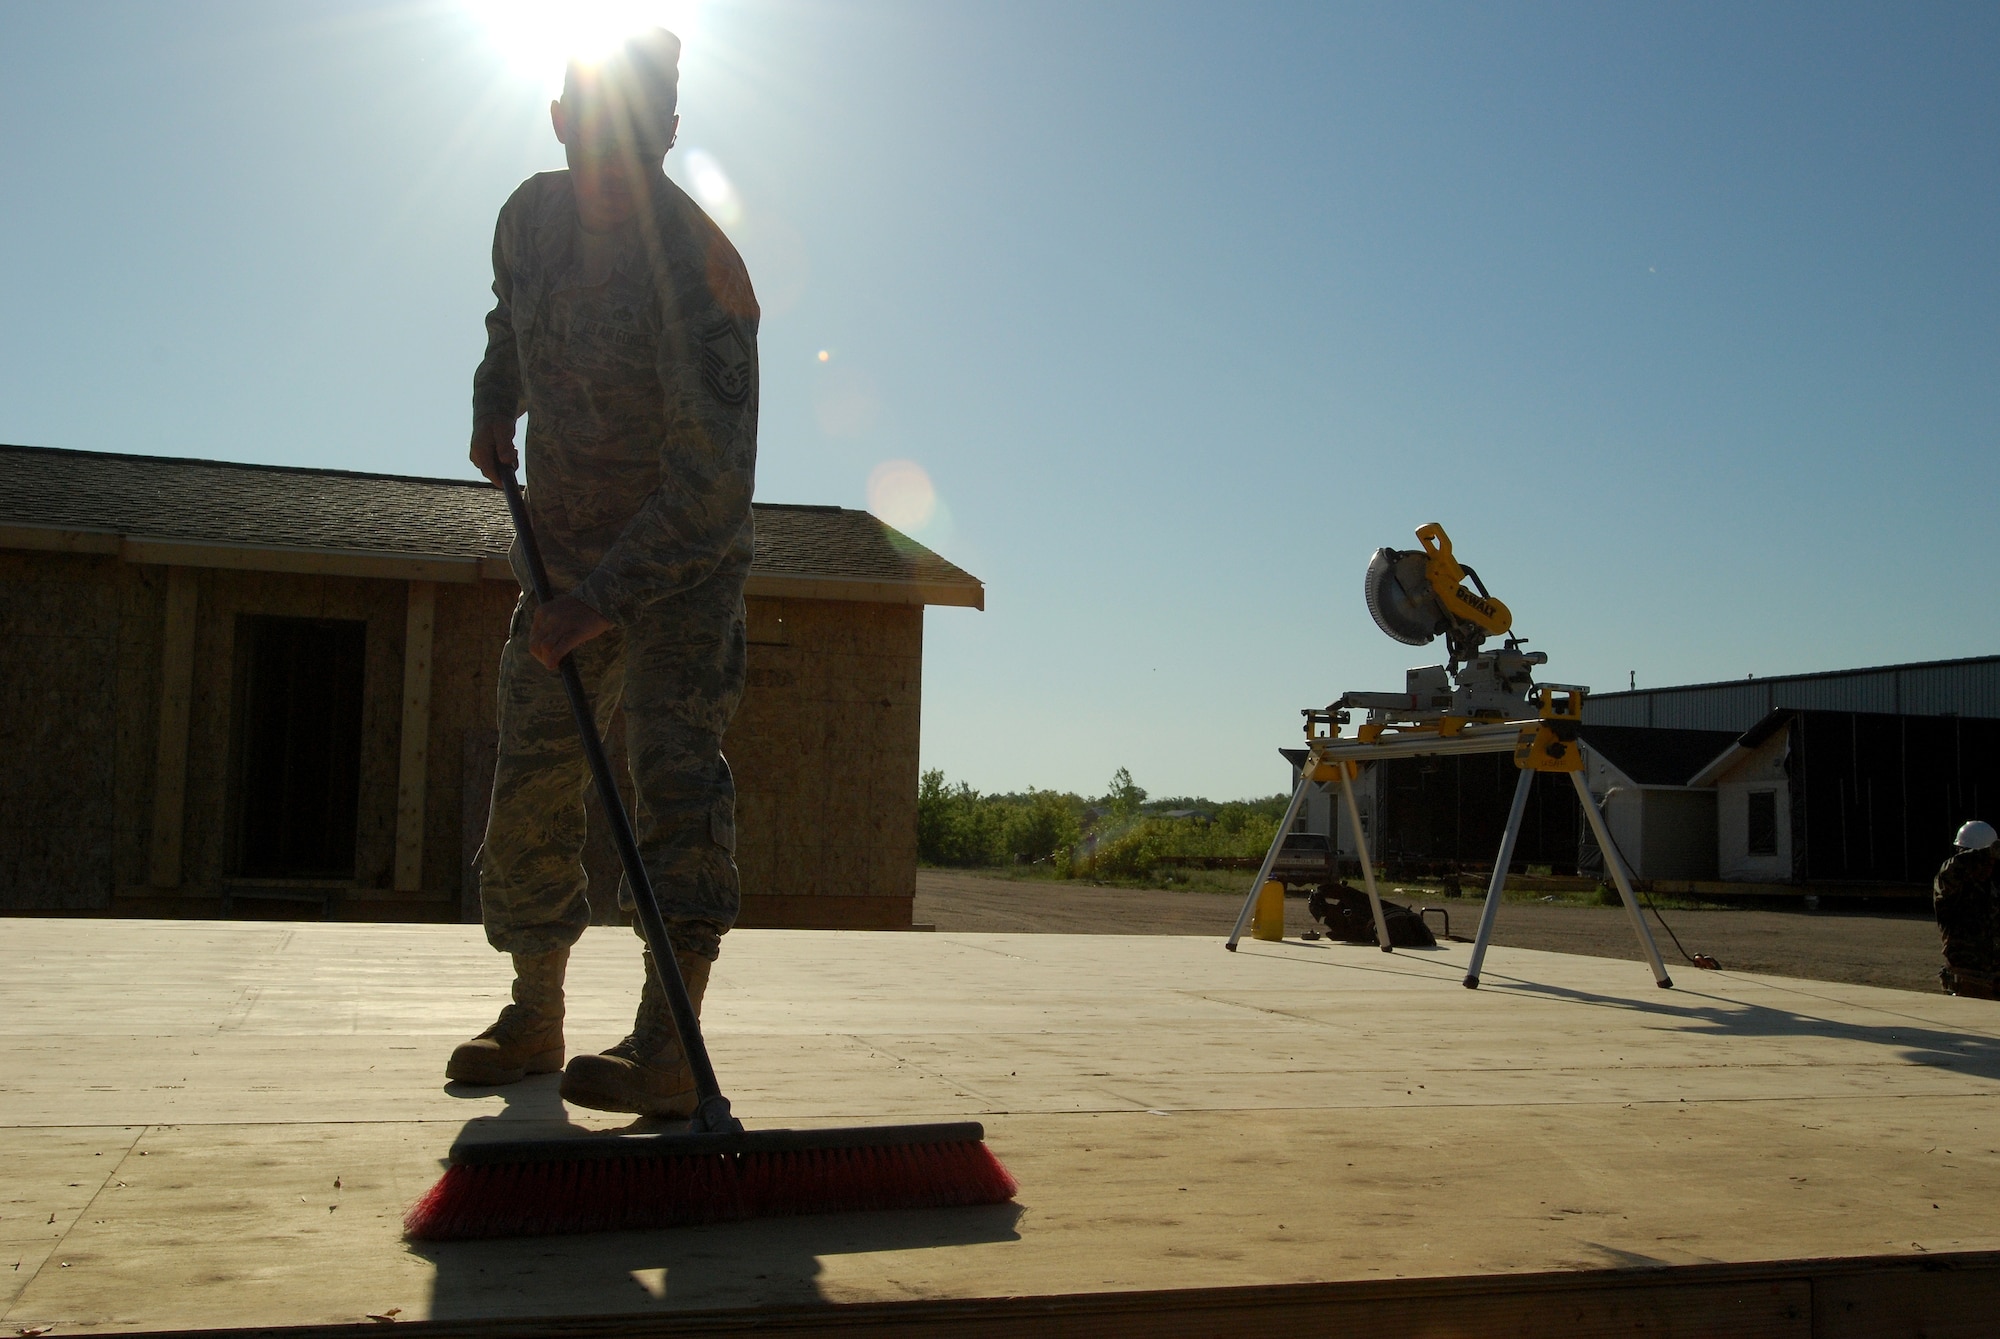 Members of the 433rd Civil Engineering Squadron conduct a humanitarian mission in the Red Lake Indian Reservation for the Red Lake band of Chippewa Indians, just outside of Bemidji, Minnesota. Senior Master Sgt. Michael Barnes, 433rd CES, sweeps the subfloor before the framing forthe walls begins. (U.S. Air Force photo/Airman 1st Class Brian McGloin)